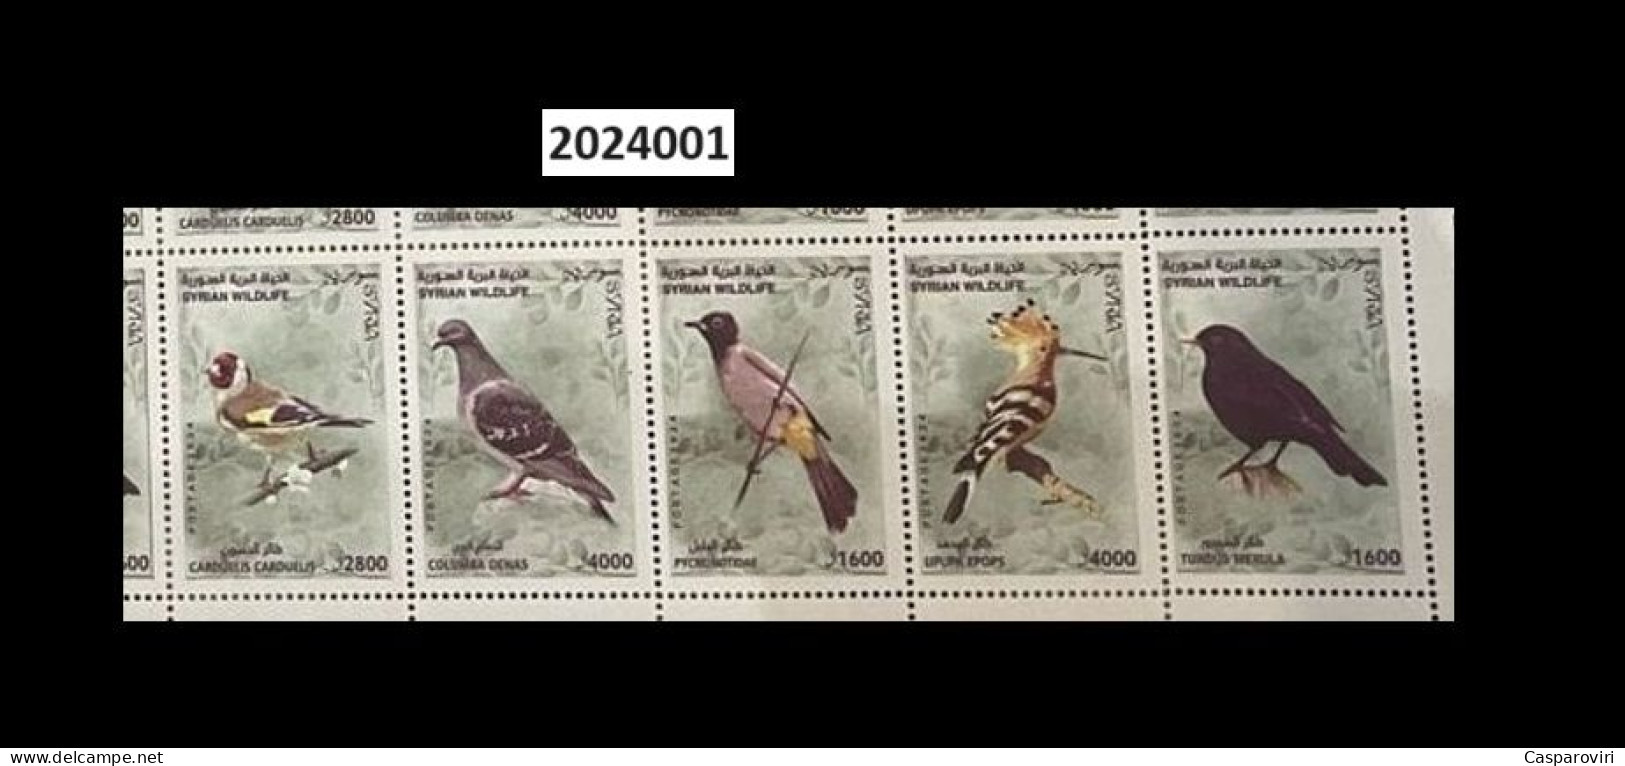 2024401; Syria; 2024; Strip Of 5 Stamps On Envelope; Syrian Wildlife; Syrian Birds; 5 Different Stamps; Canceled - Syria